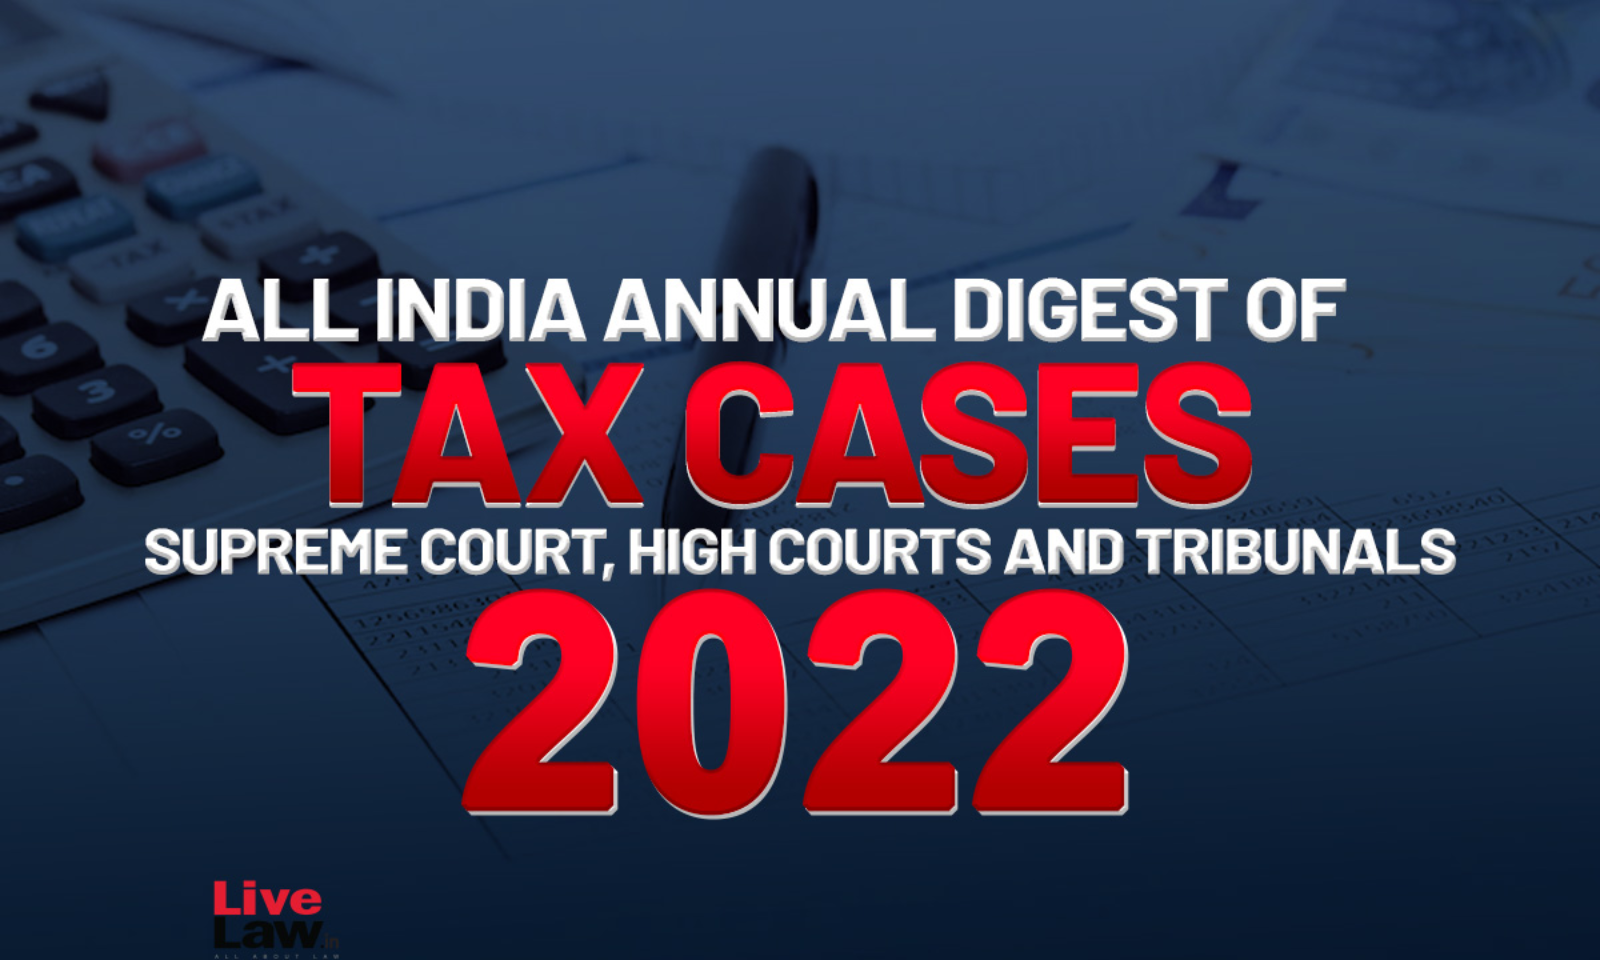 Sri Divya Bathroom Show Sex - All India Annual Digest of Tax Cases 2022-Supreme Court, High Courts And  Tribunals